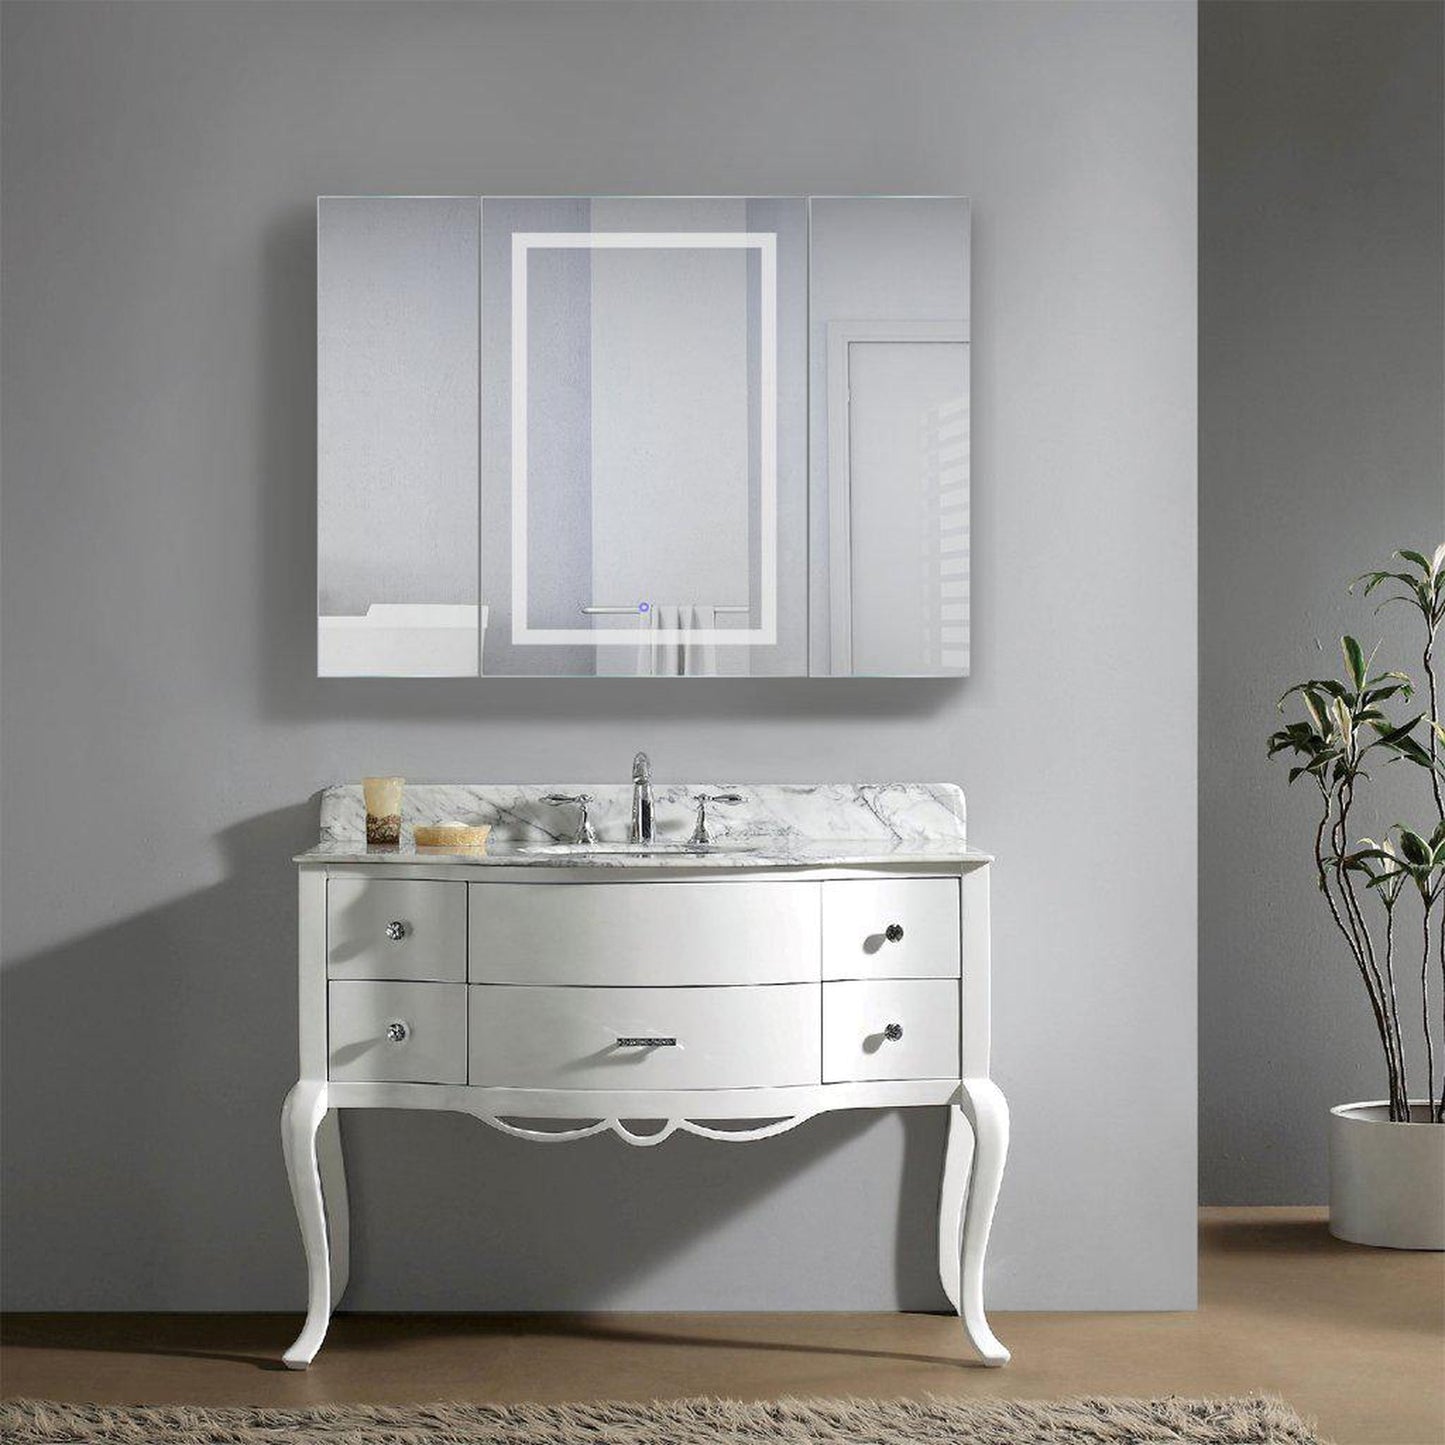 Krugg Reflections Svange 48" x 36" 5000K Single Tri-View Left-Right-Right Opening Recessed/Surface-Mount Illuminated Silver Backed LED Medicine Cabinet Mirror With Built-in Defogger, Dimmer and Electrical Outlet